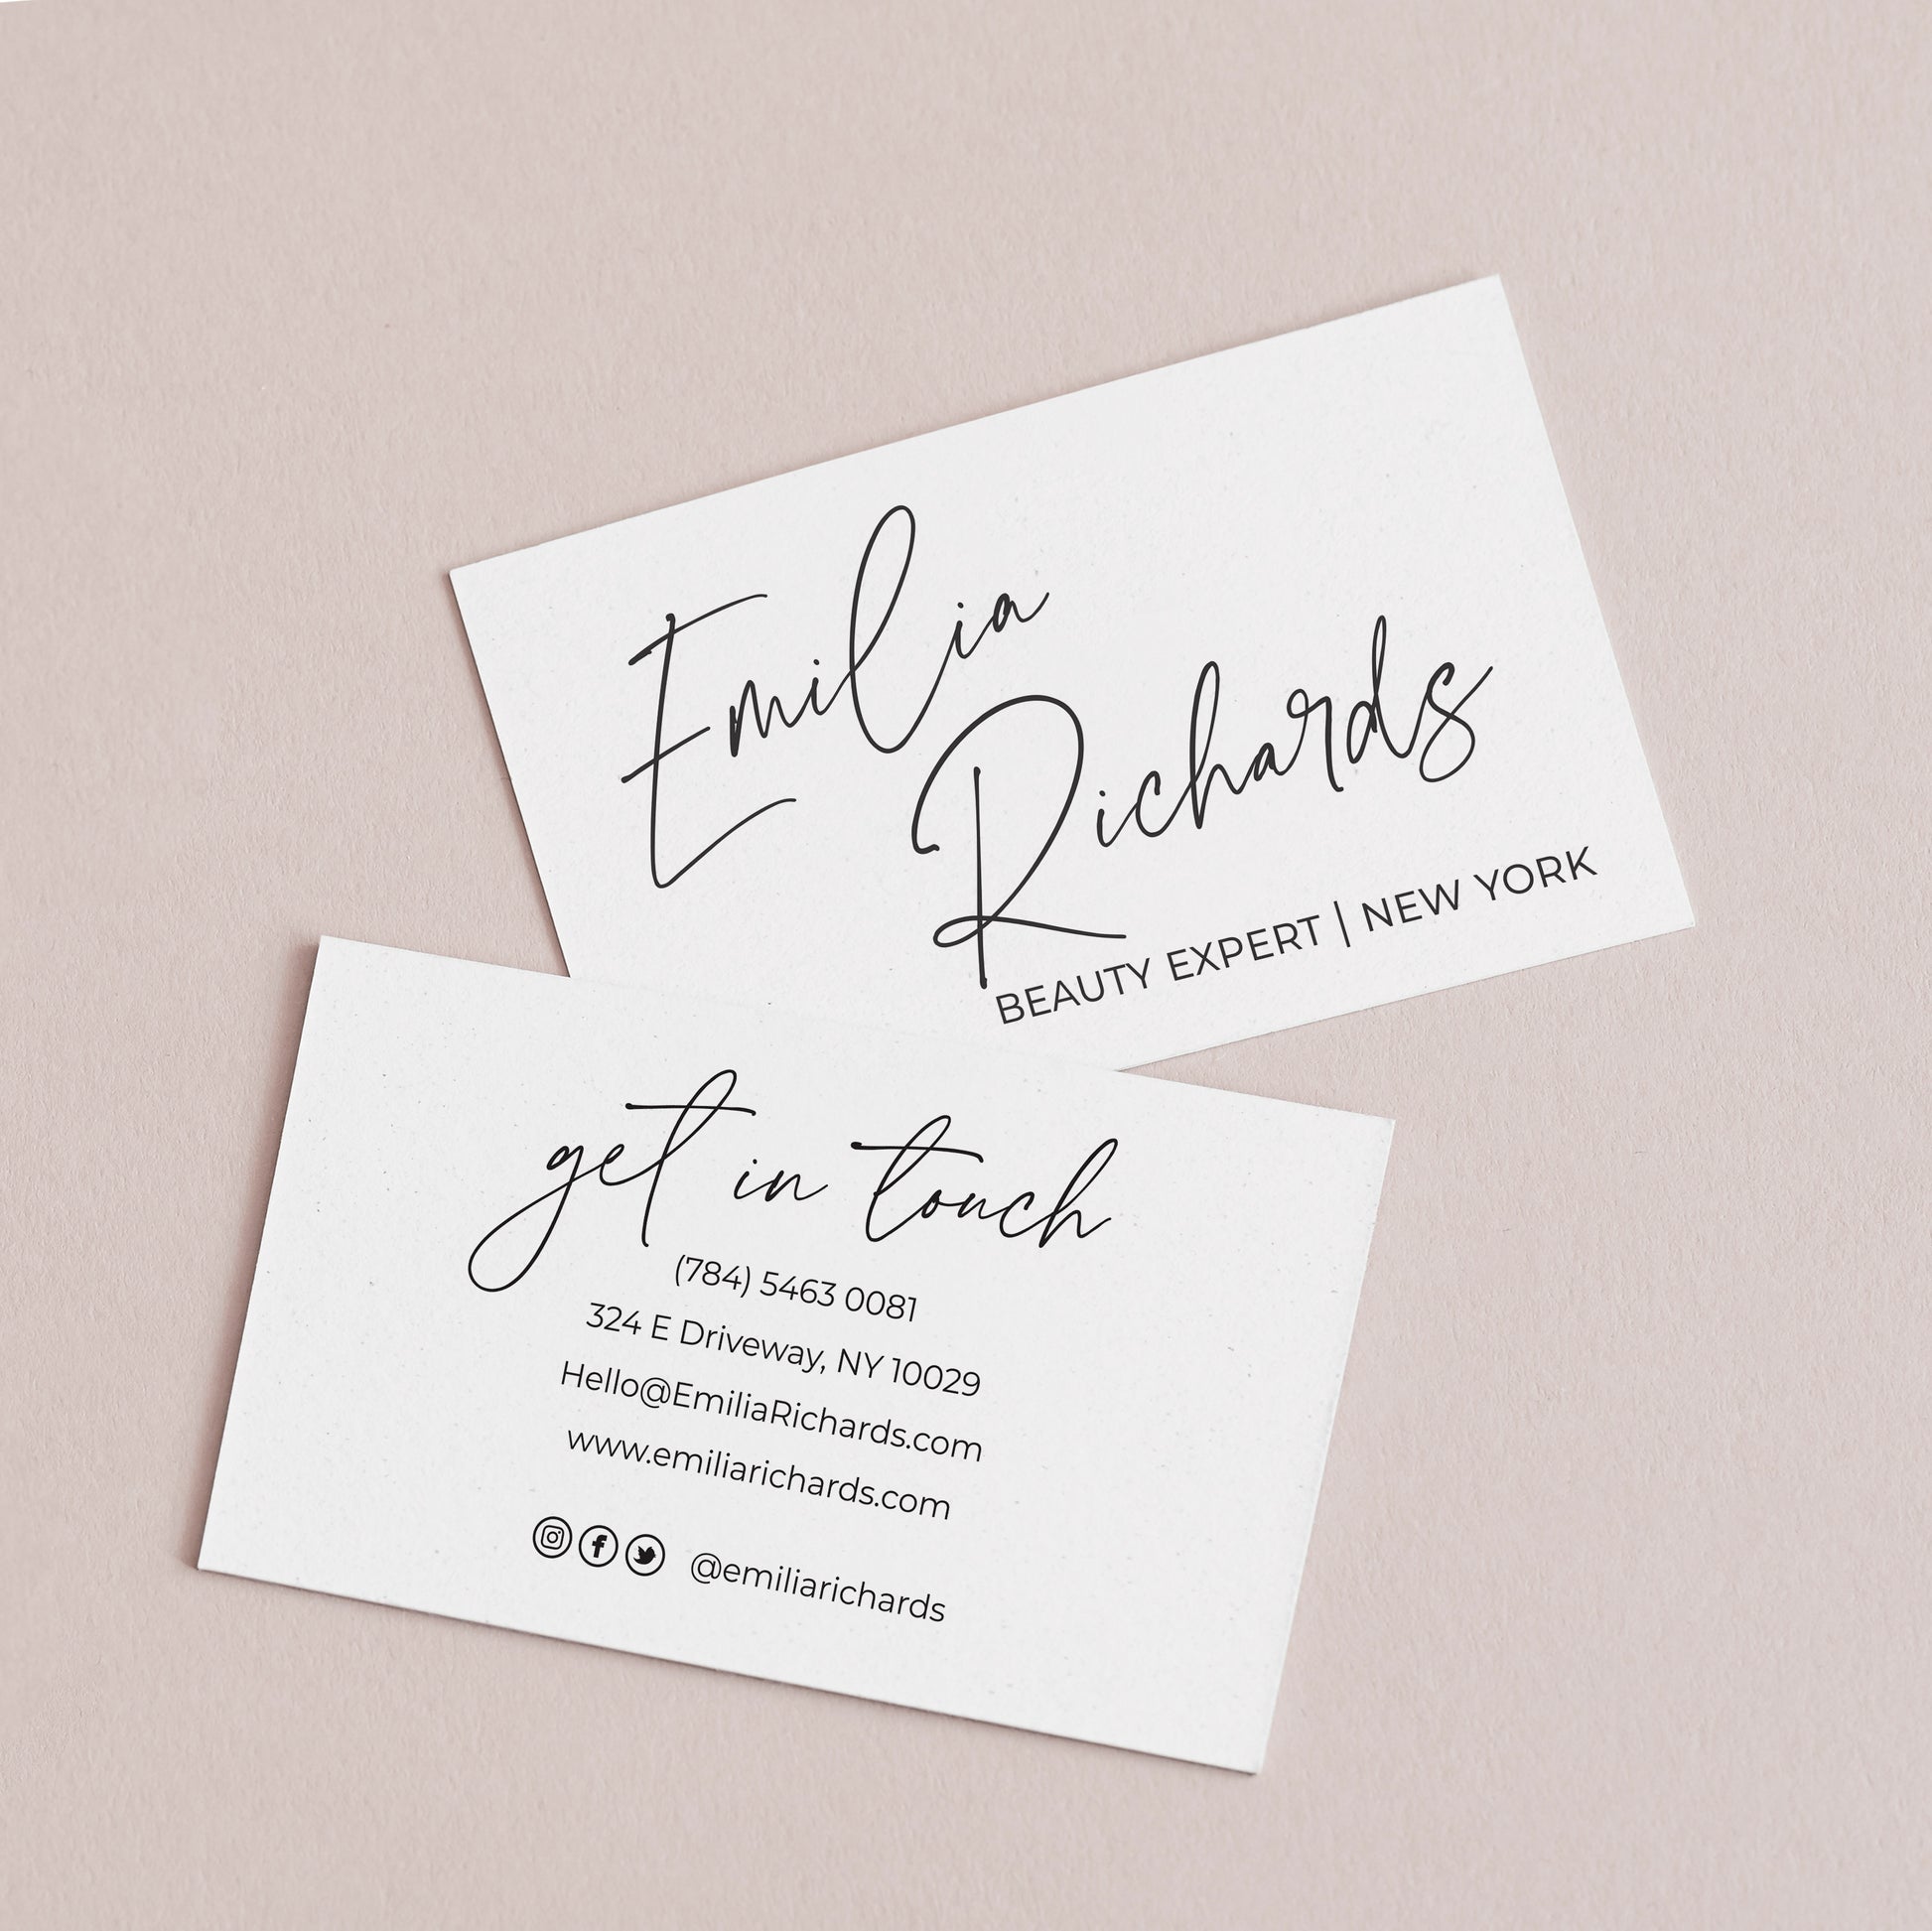 Personalized Business Cards - Modern Sophistication with Captivating Black and White Design - XOXOKristen